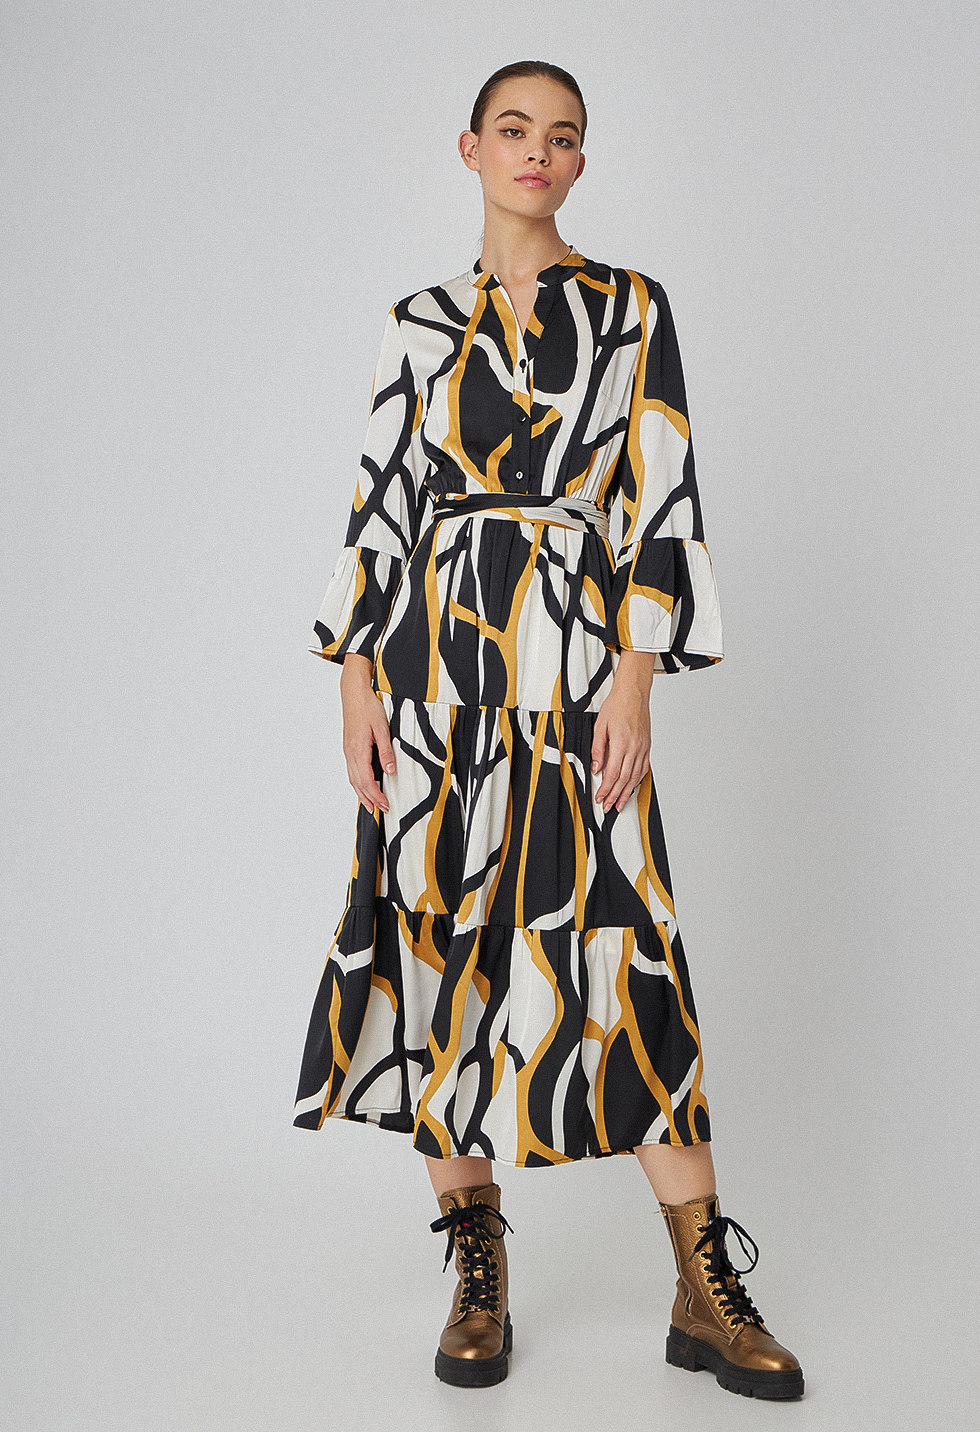 Printed satin dress with sections